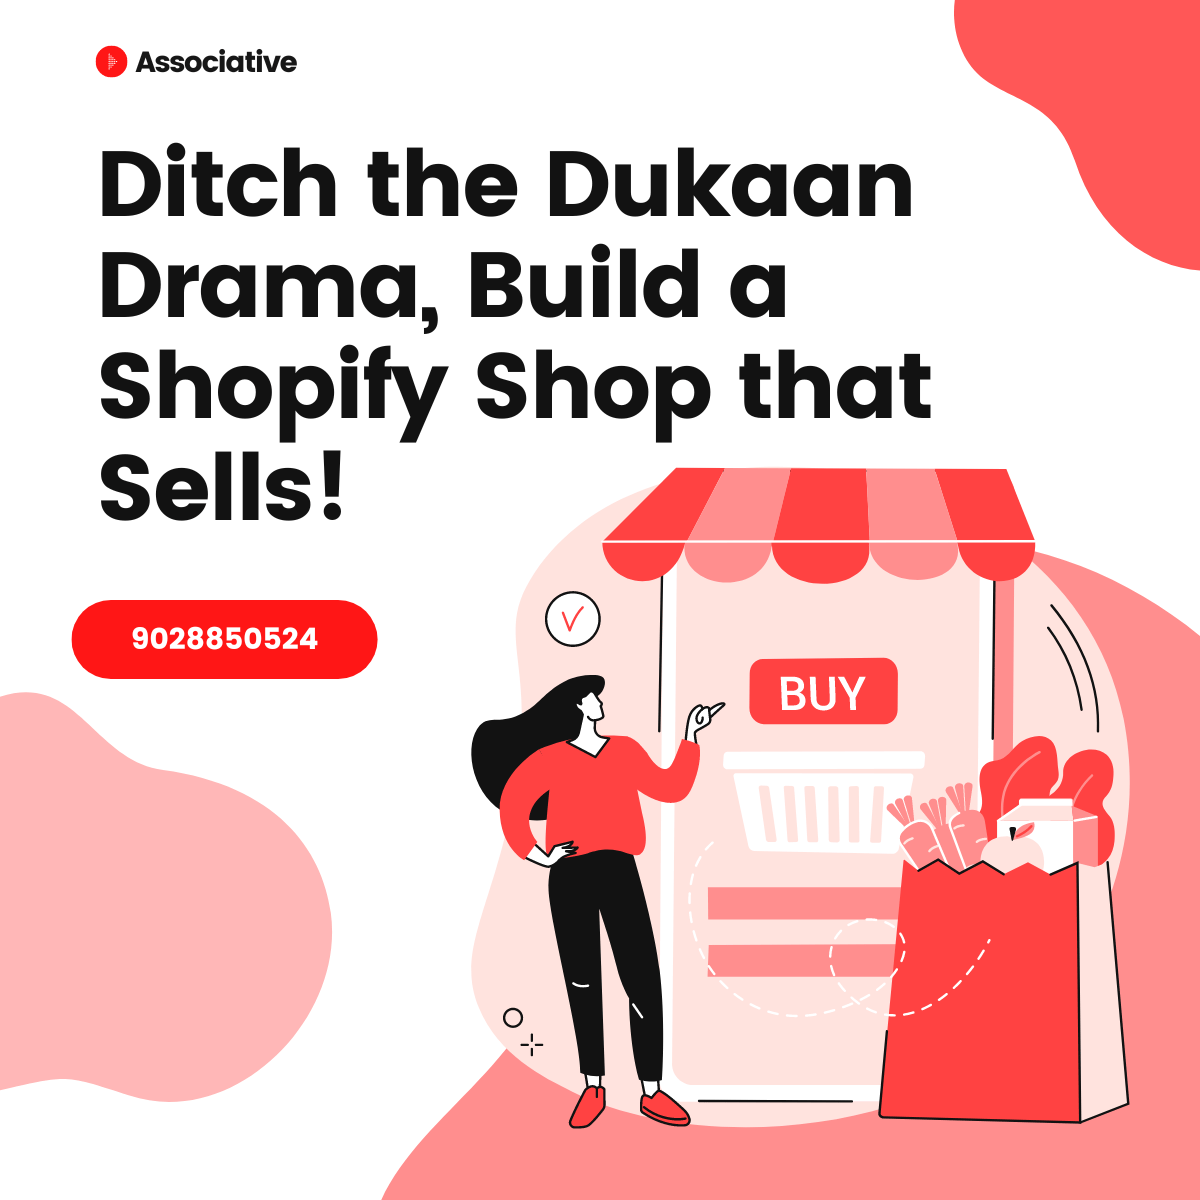 Ditch the Dukaan Drama, Build a Shopify Shop that Sells!